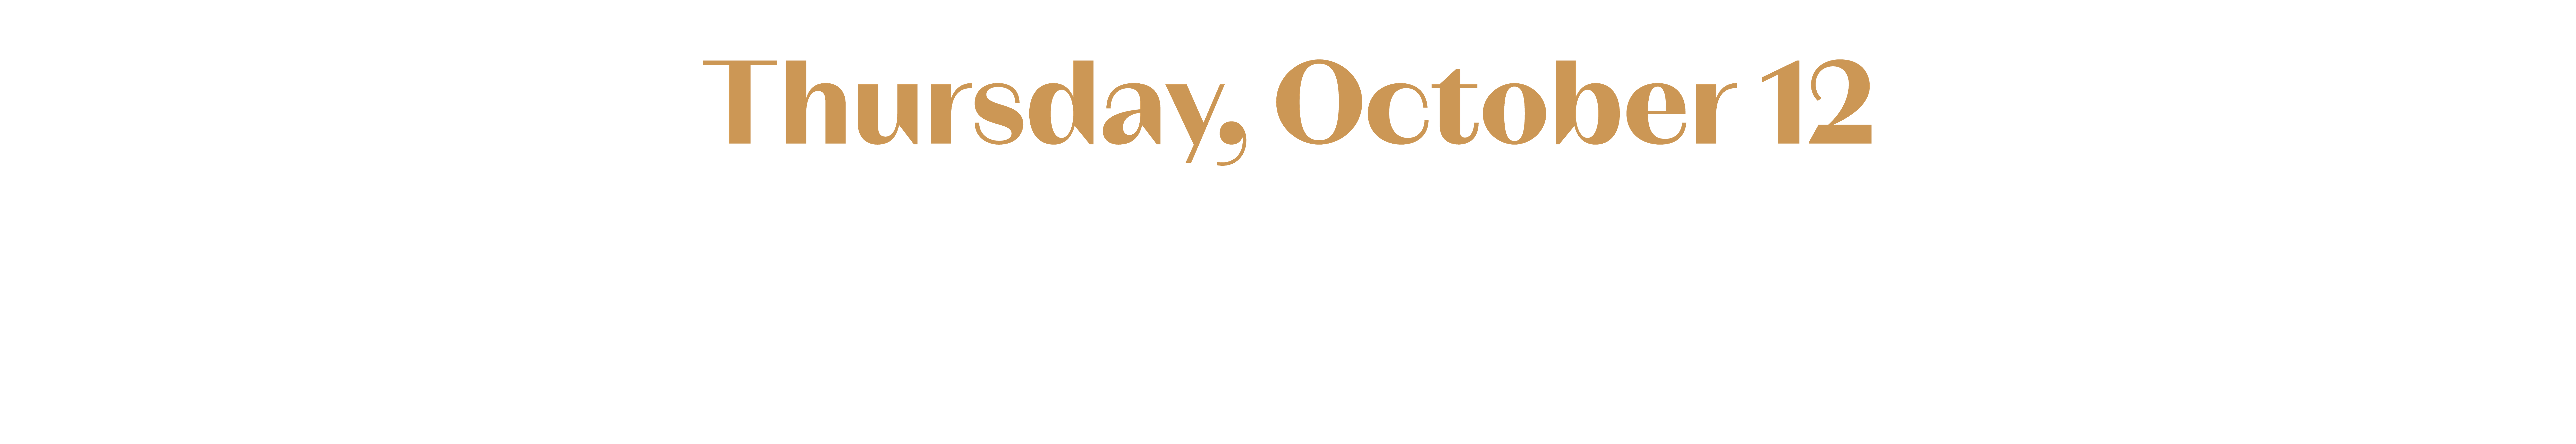 world business chicago presents the chicago international 2023 gala celebrating diplomacy throughout the world. Thursday, October 12 Reception 6:00PM Dinner 7:00PM, Hilton Chicago, 720 S.Michigan Ave.